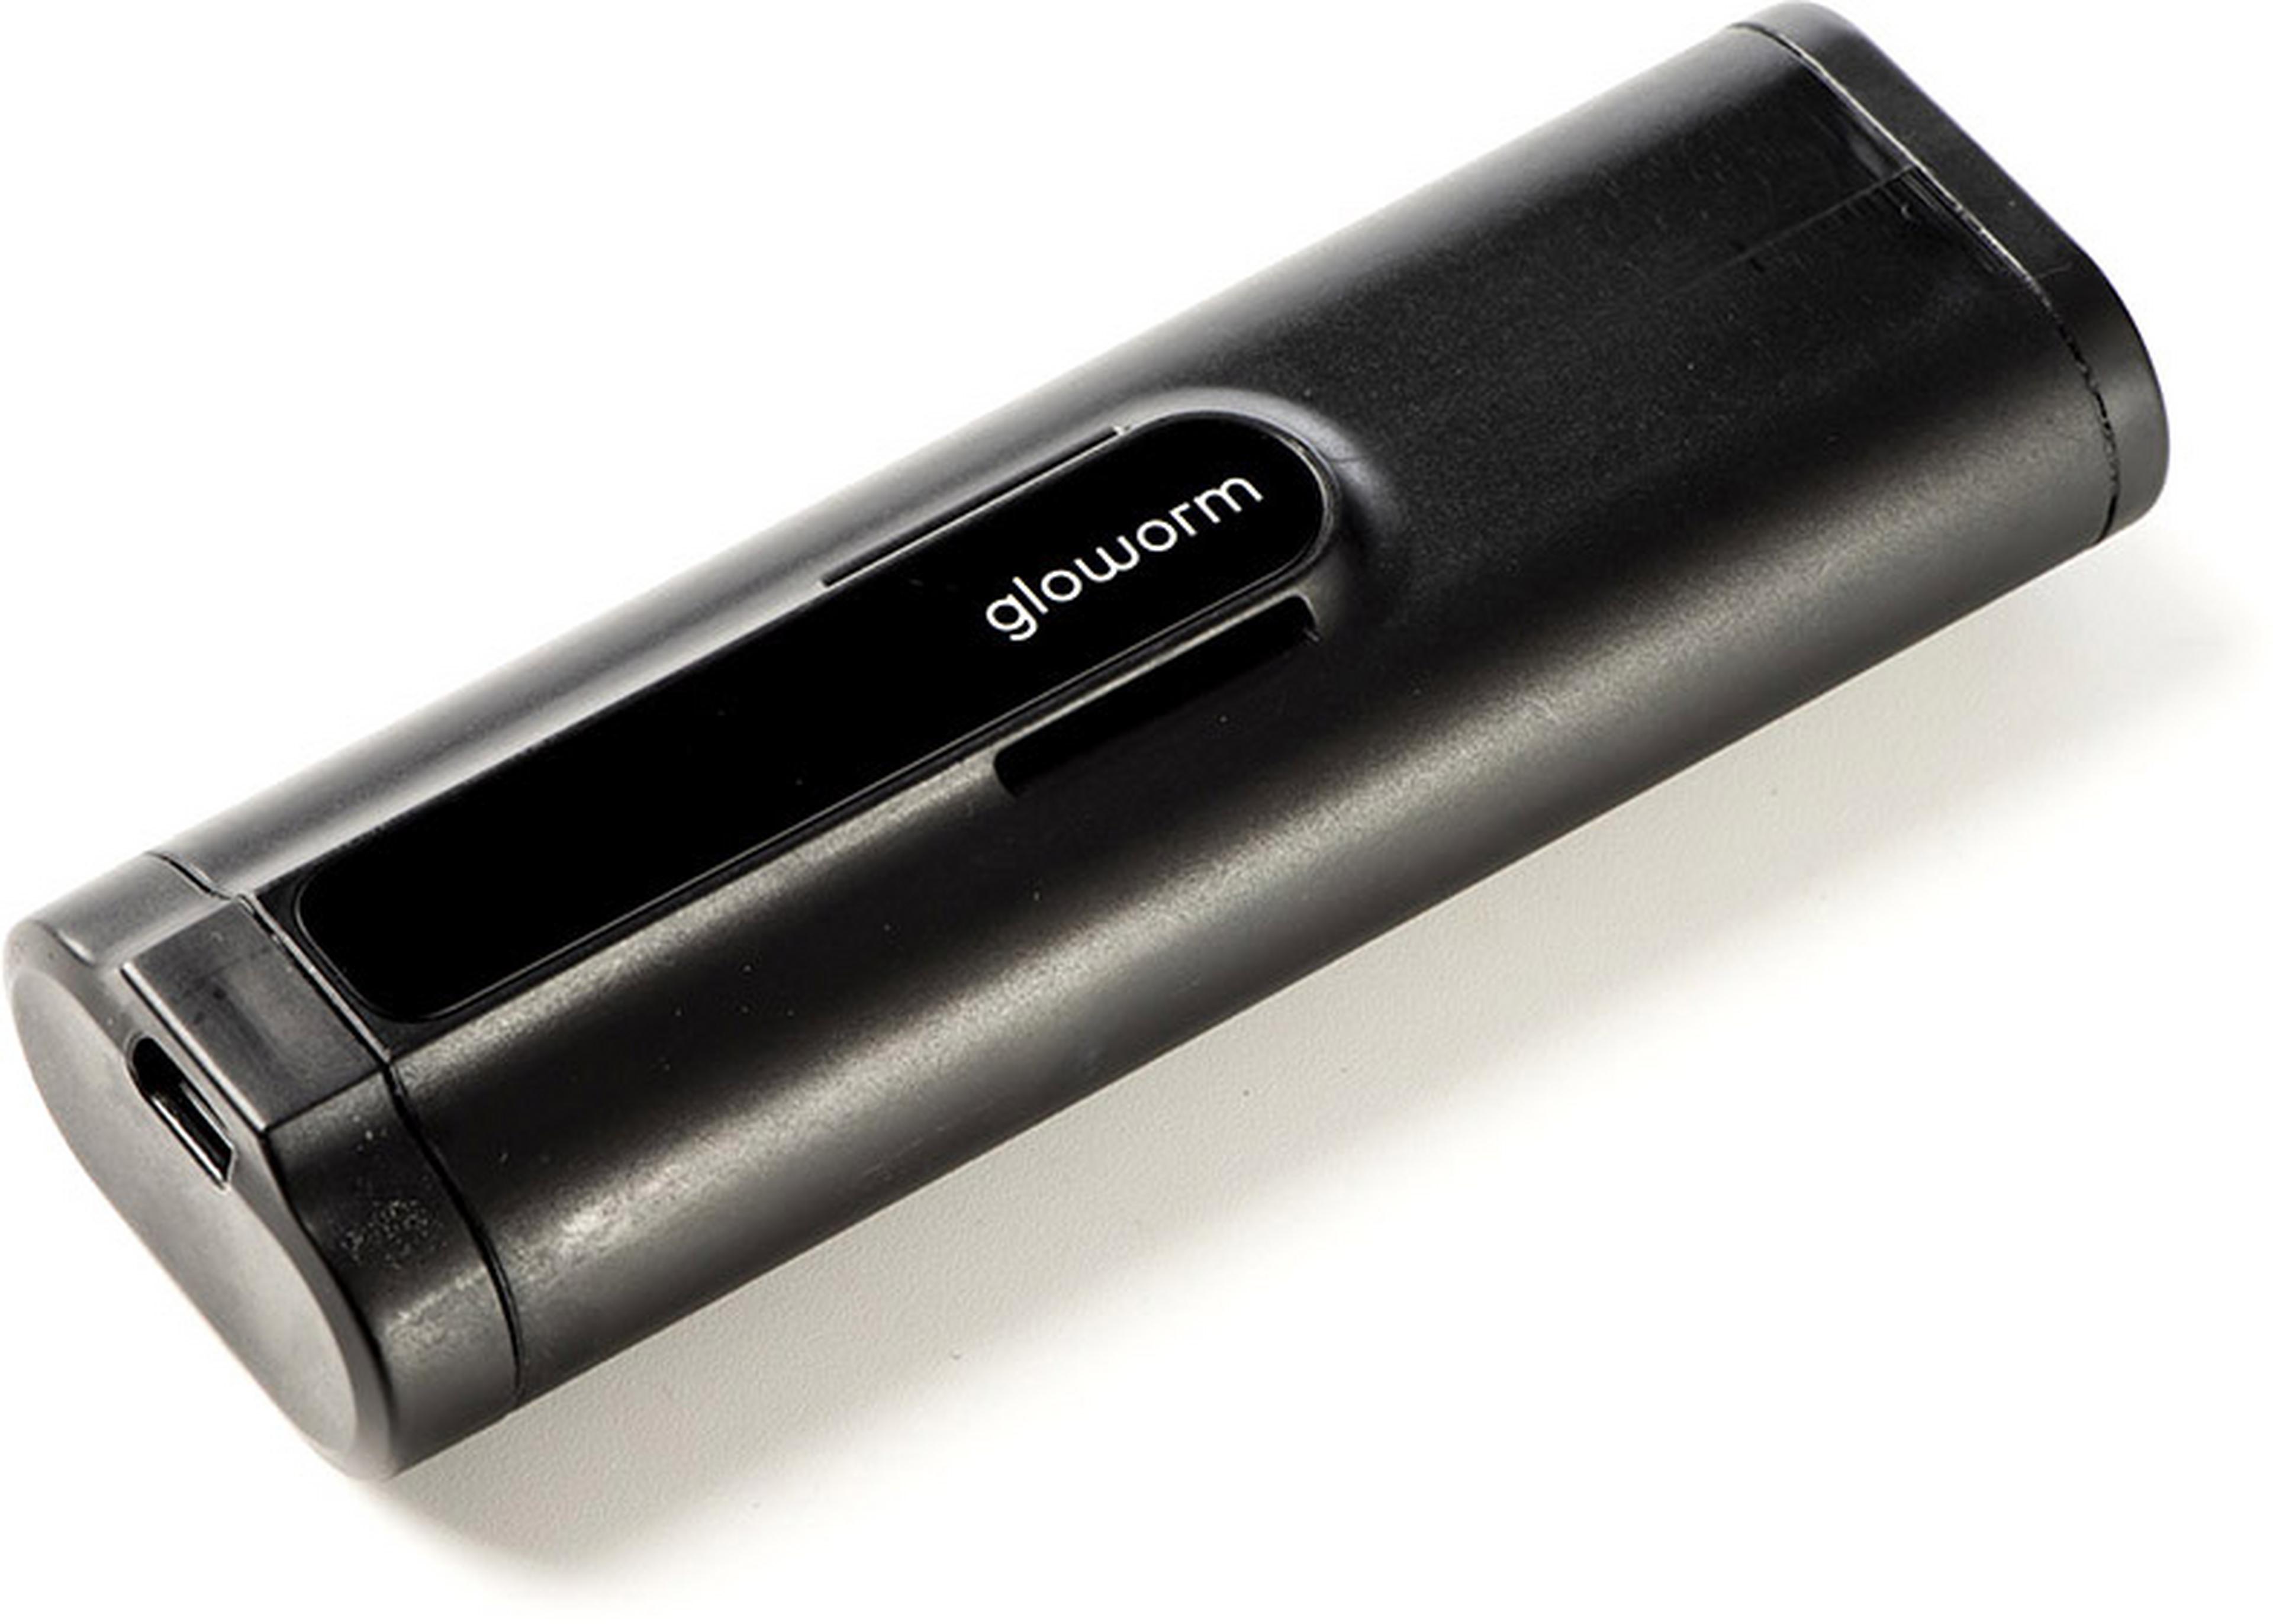 Gloworm Power Pack 10 Battery (G2.0)